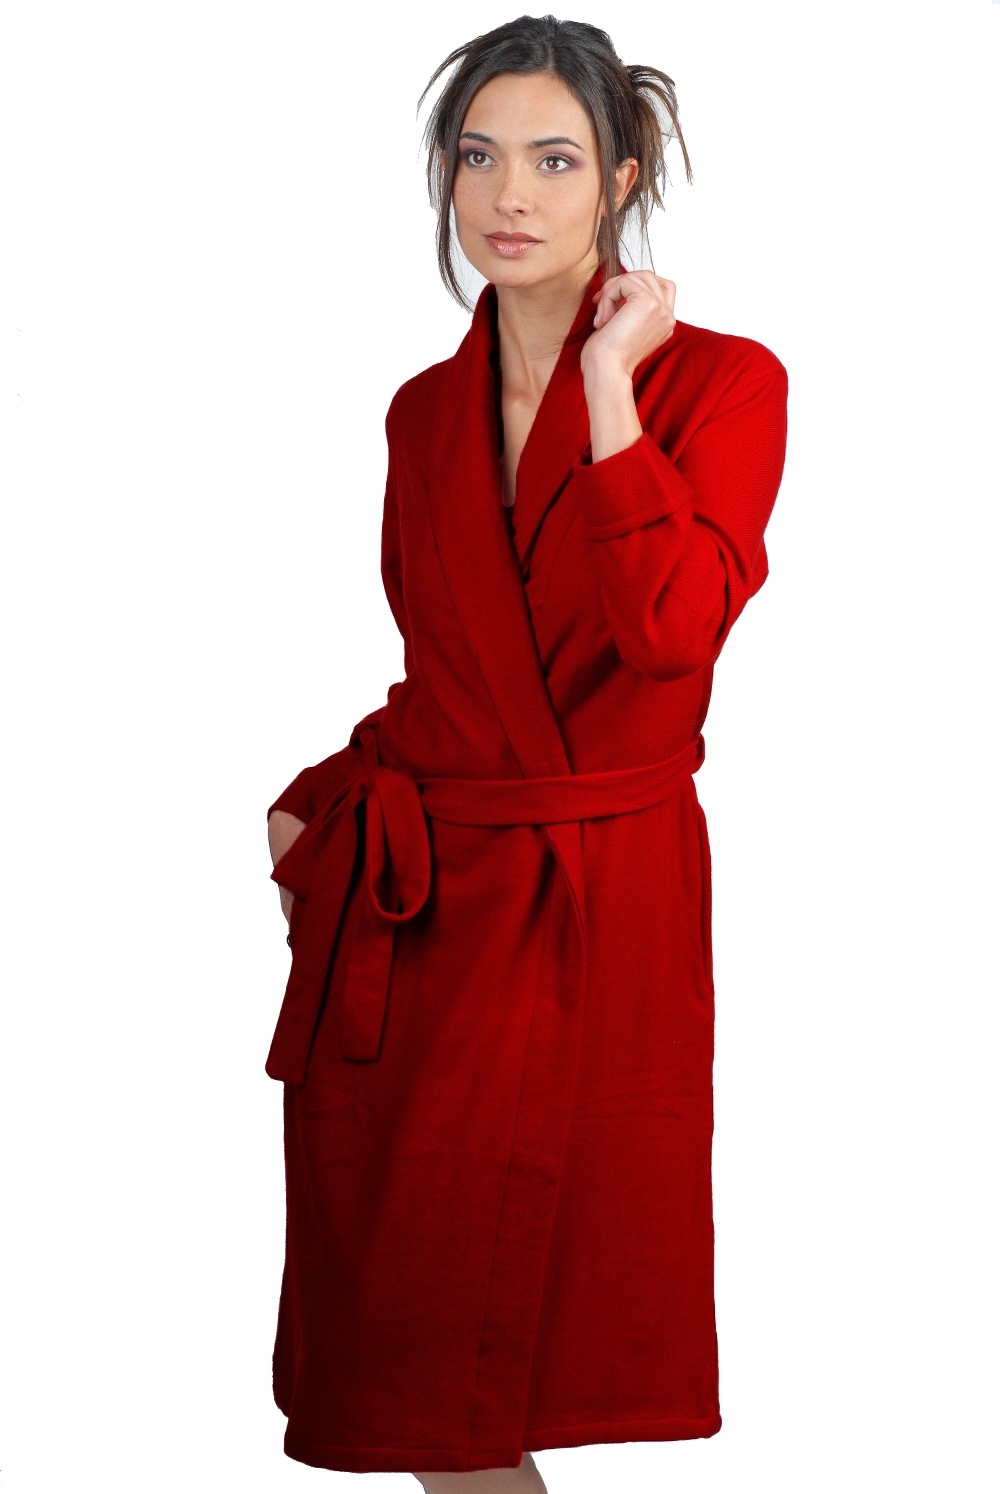 Cashmere accessori cocooning mylady rosso intenso t4